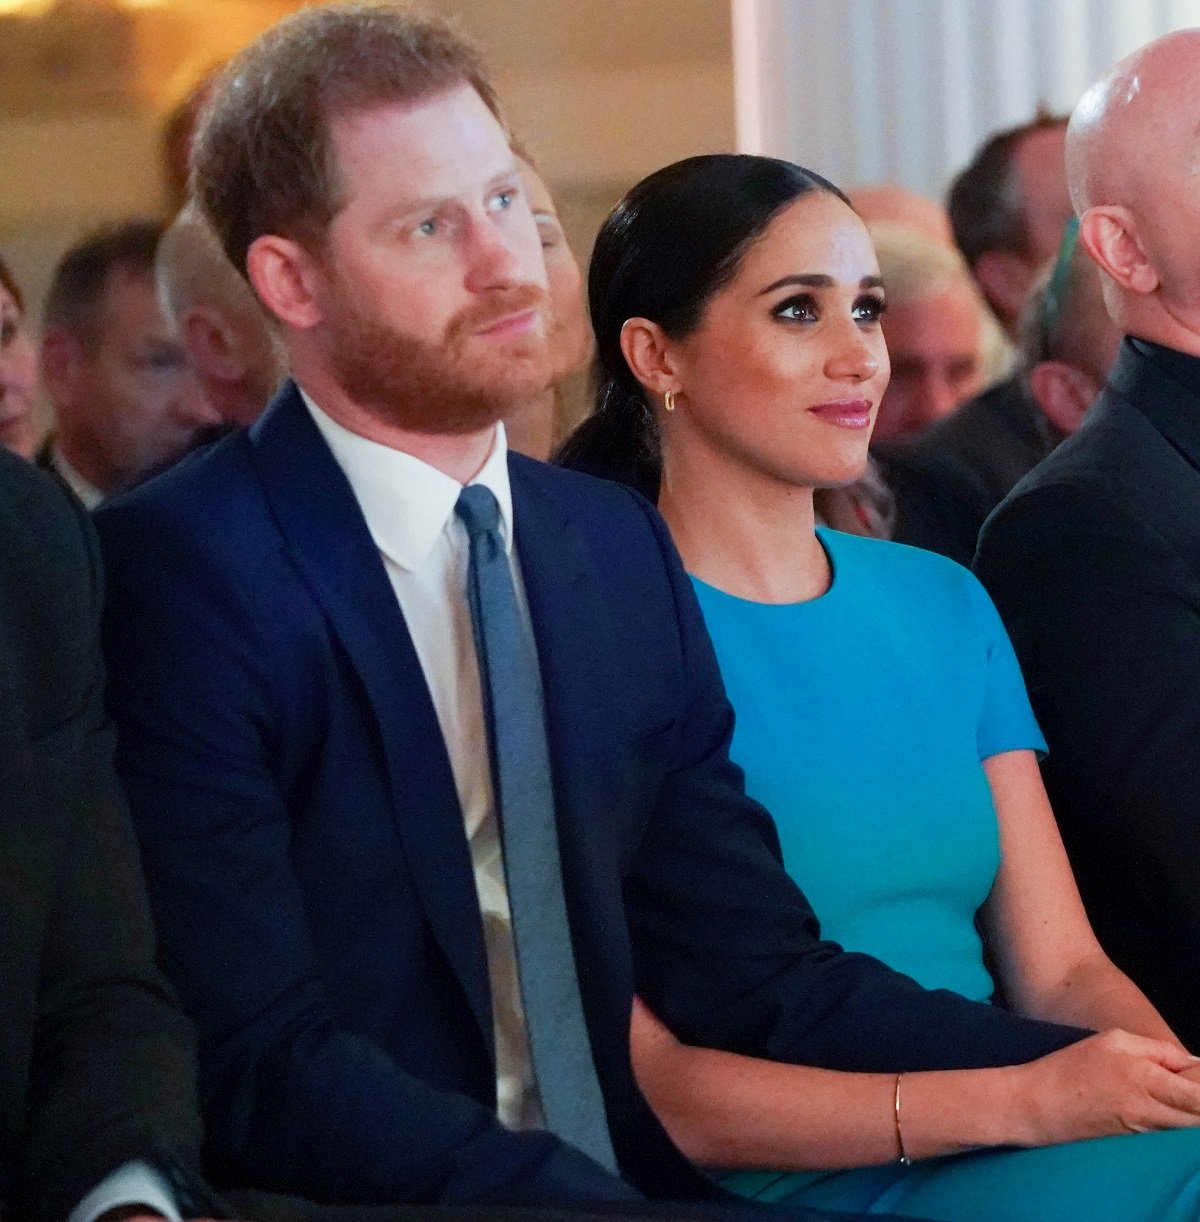 Prince Harry and Meghan Markle sitting next to eachother and holding hands at the annual Endeavour Fund Awards